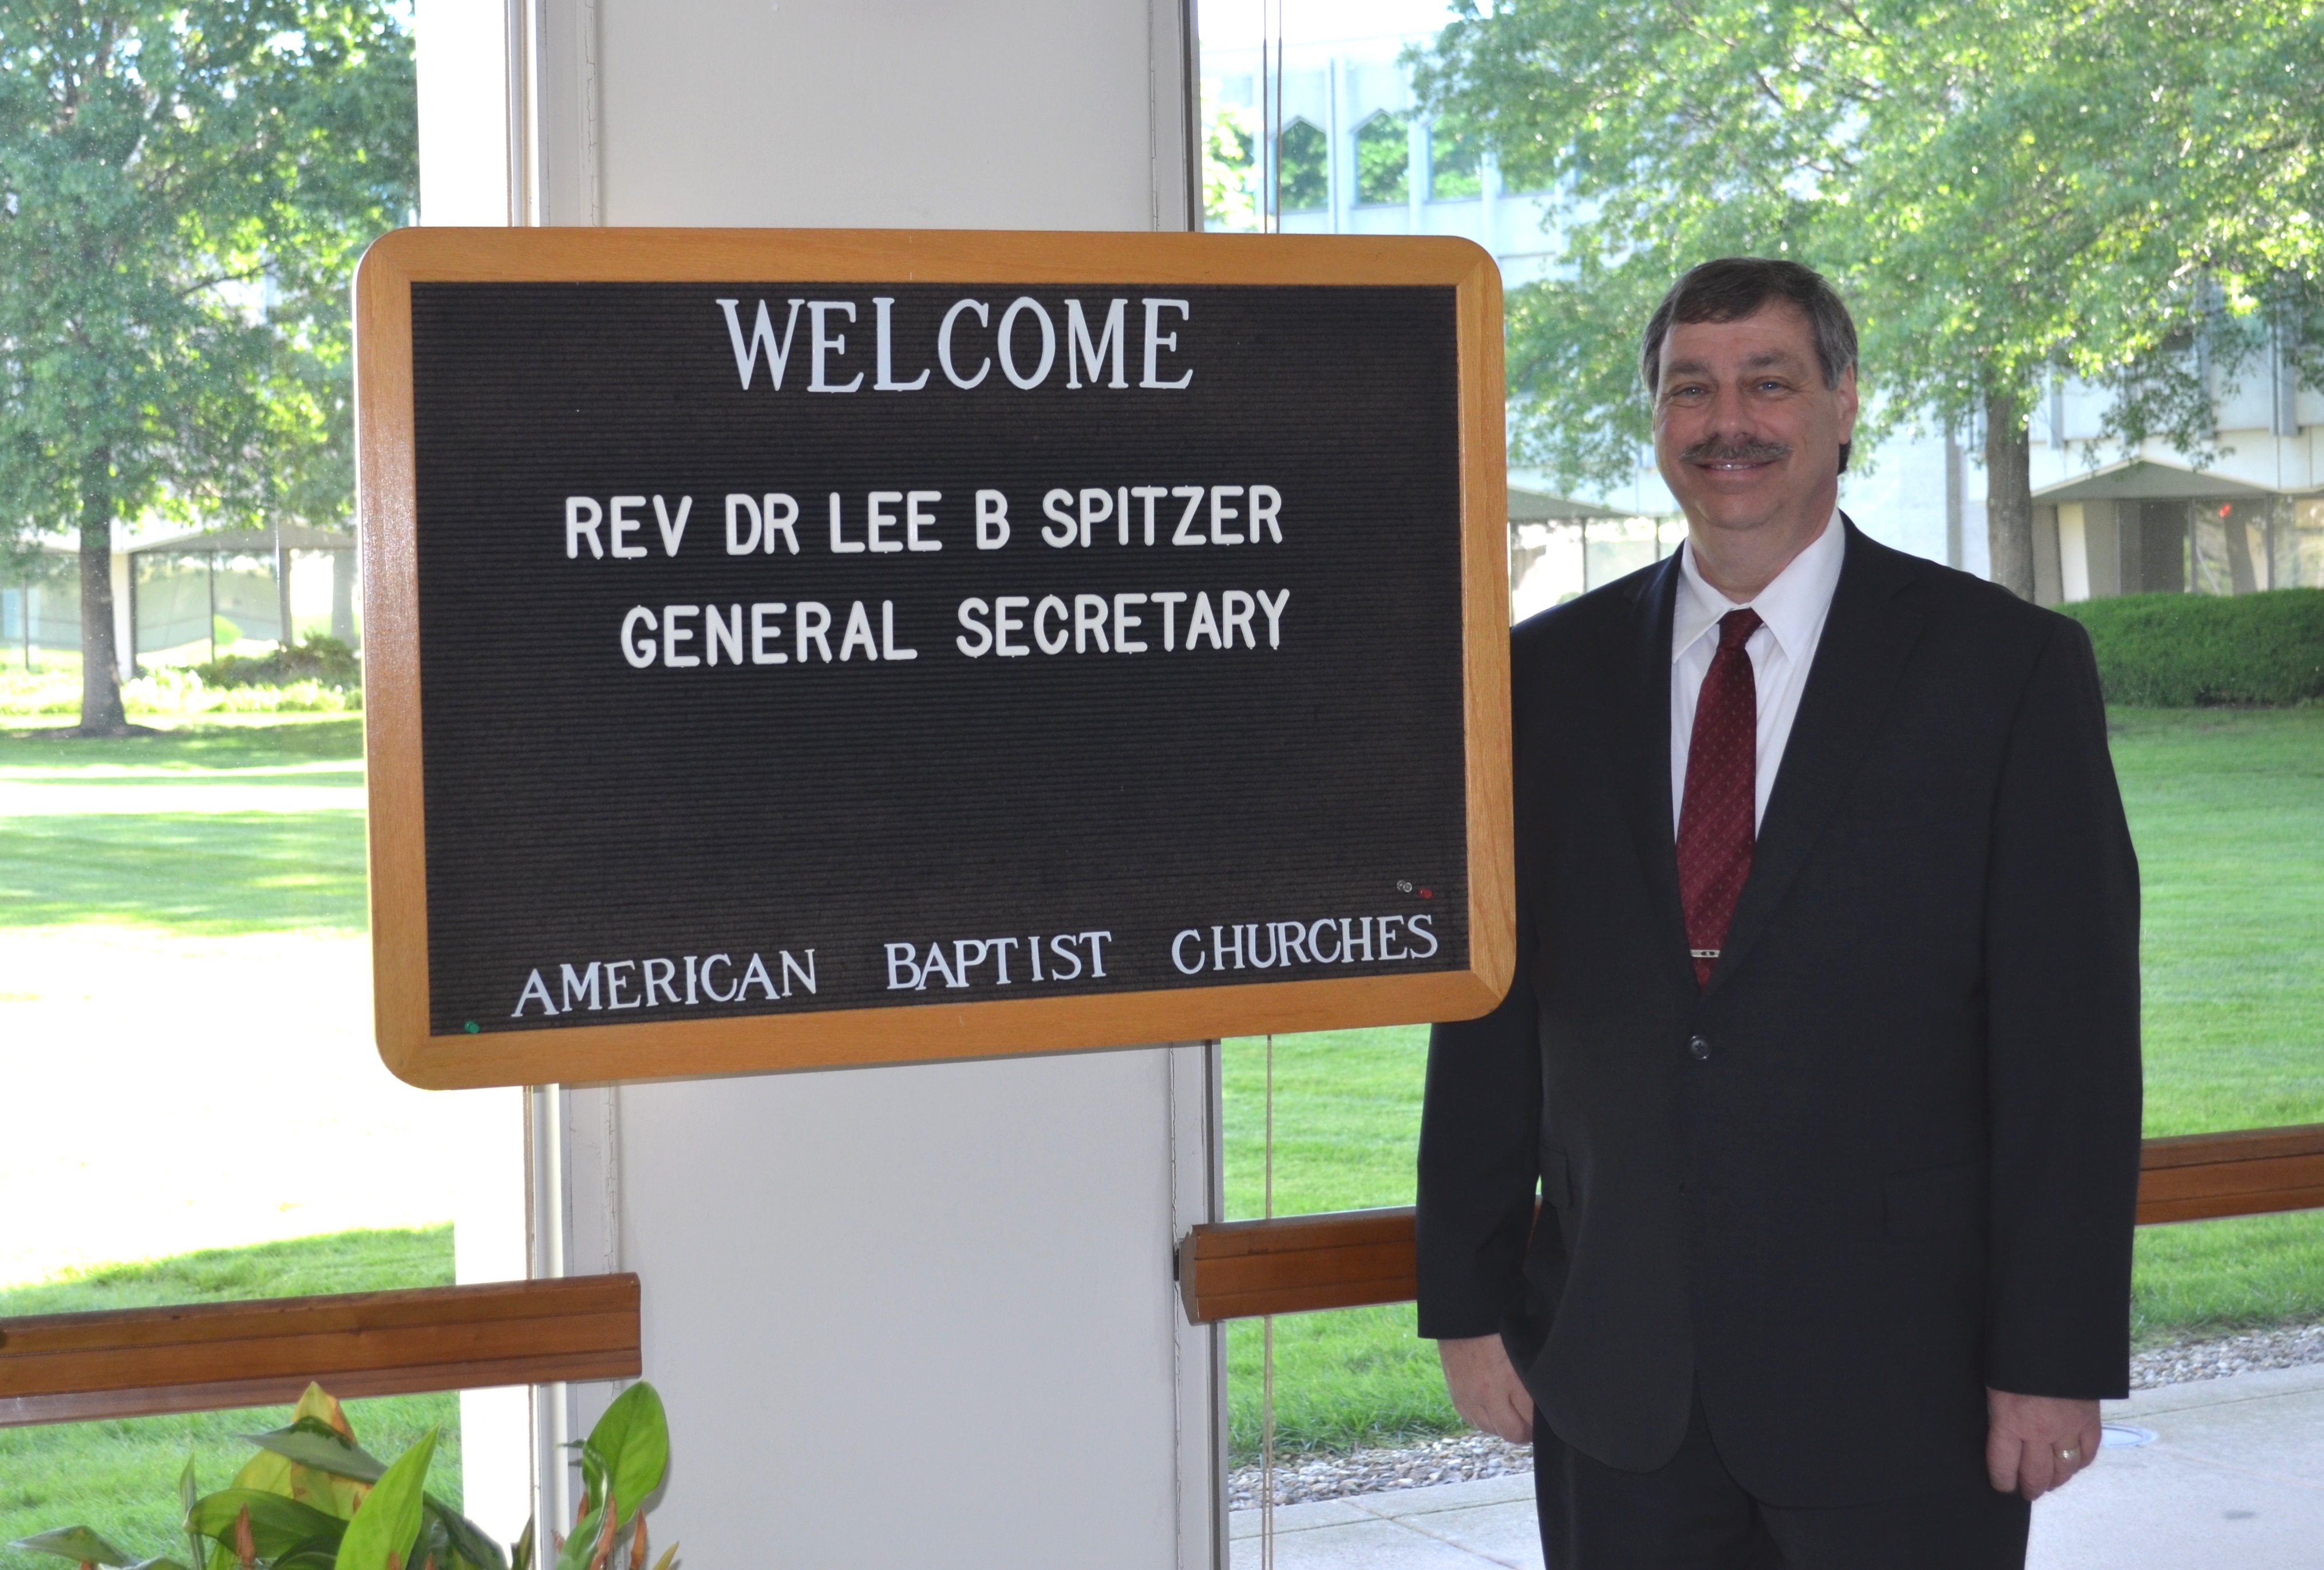 Rev. Dr. Lee B. Spitzer arrives at the Mission Center on his first day as General Secretary